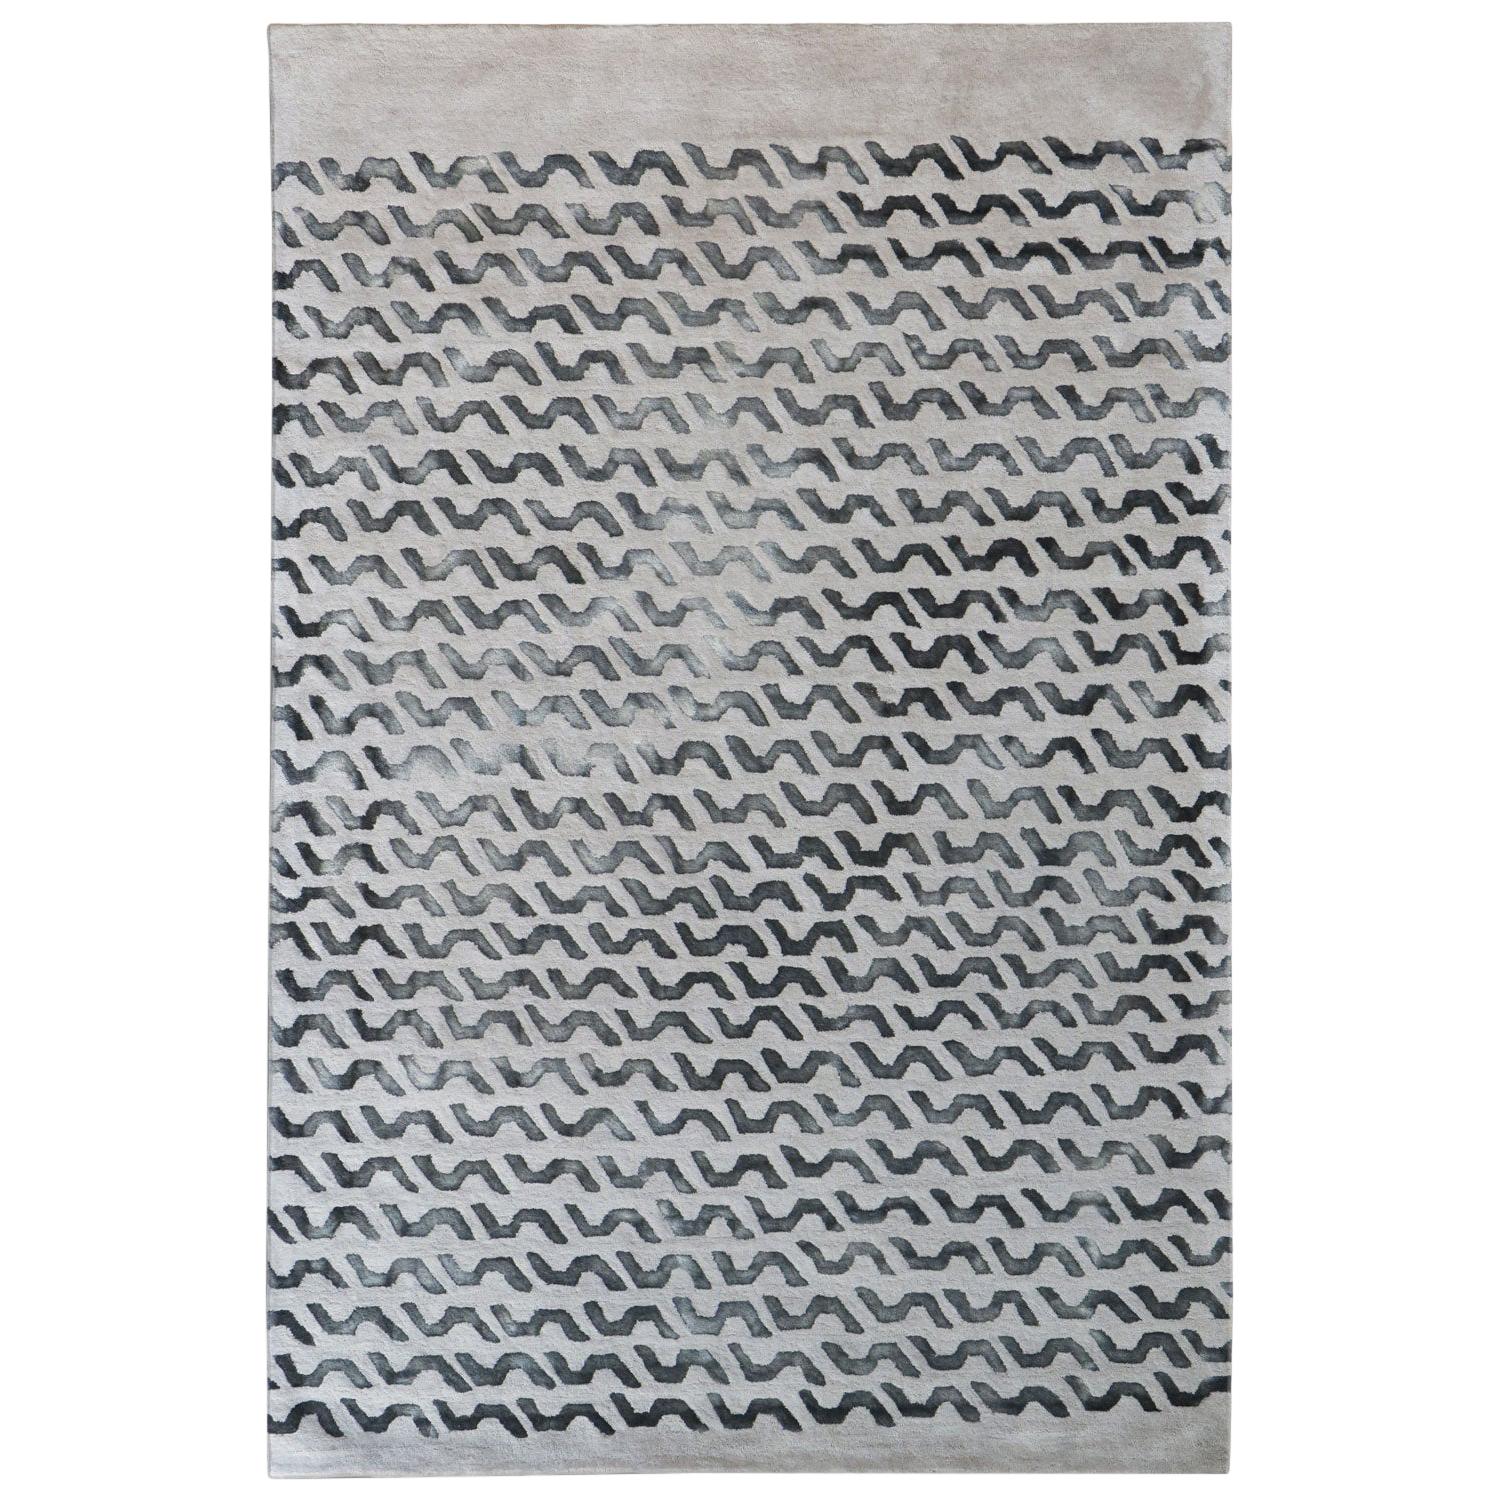 Contemporary Patterned New Zealand Wool Rug by Deanna Comellini 200x300 cm